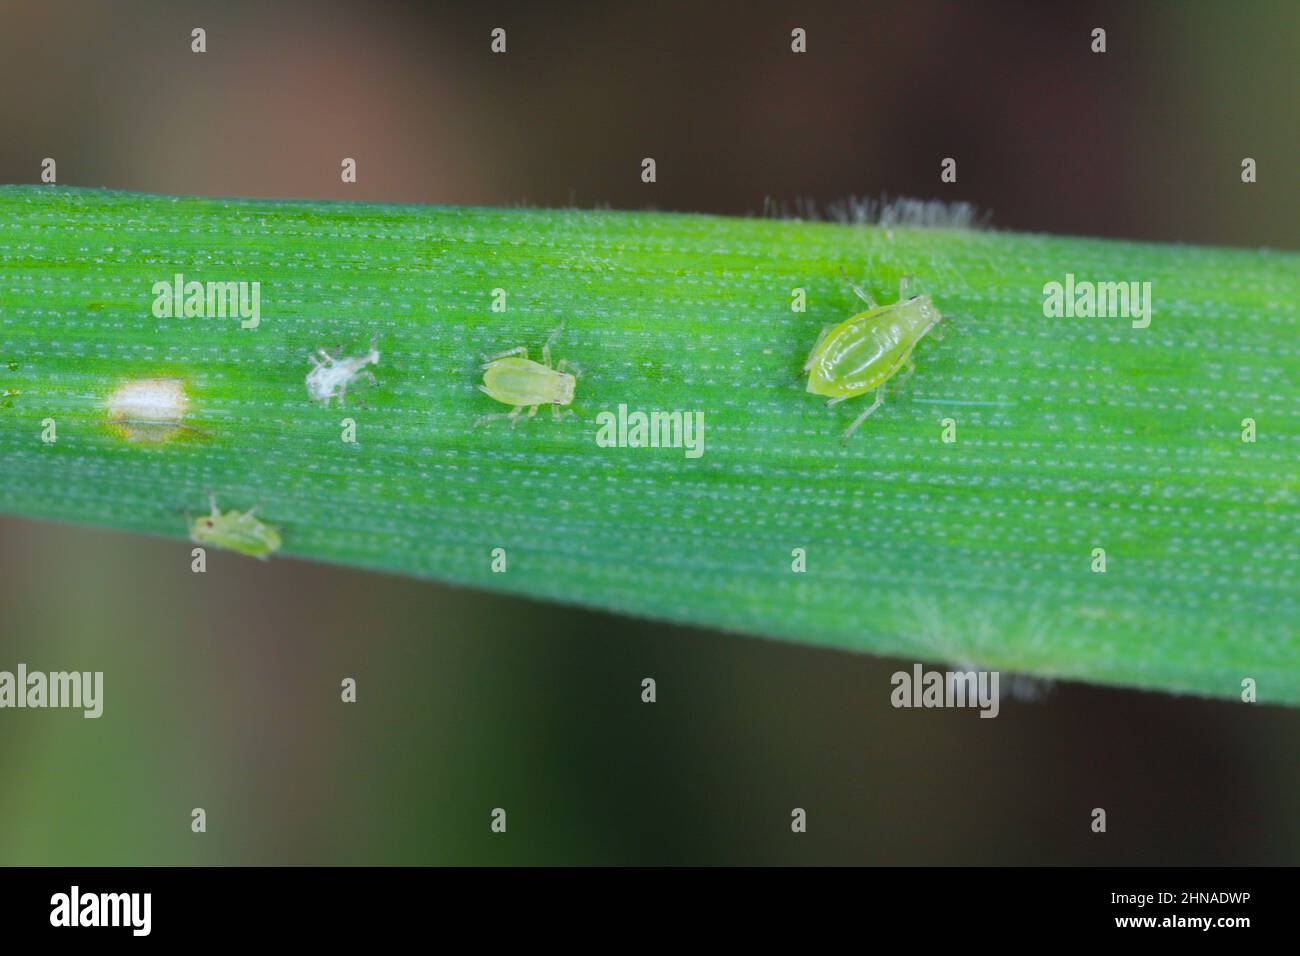 Peach aphid and powdery mildew on barley foliage. Stock Photo